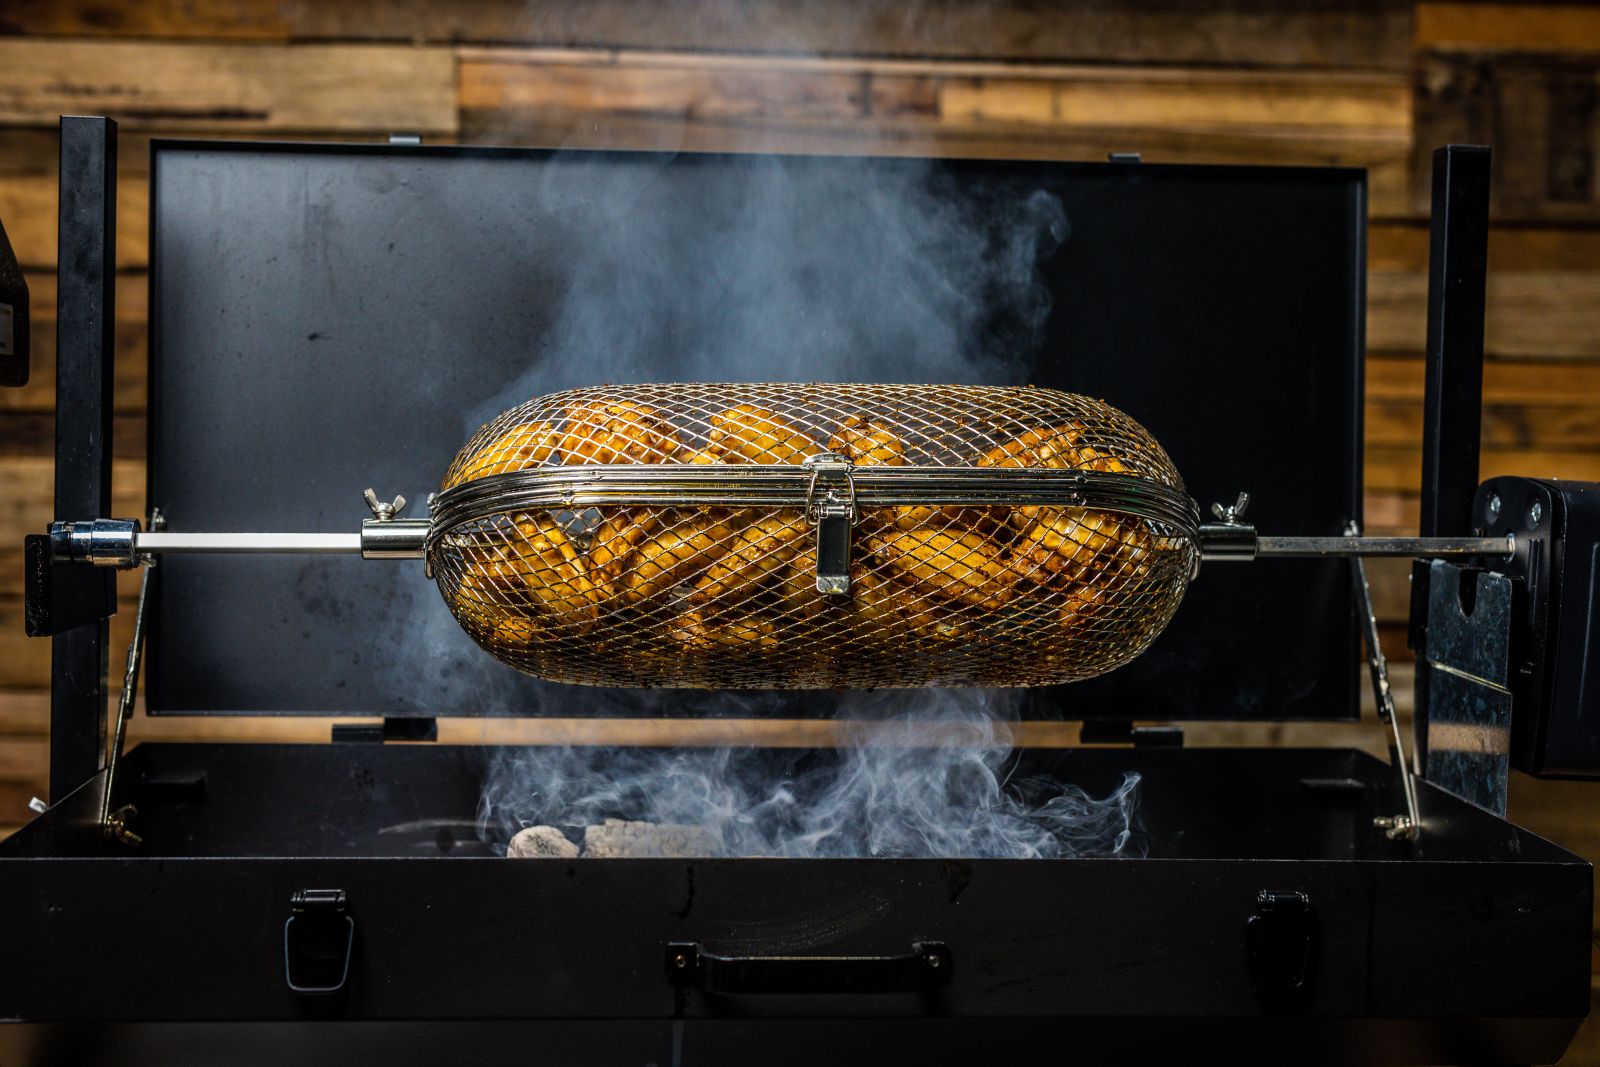 This image shows chicken wings cooked on Rotisserie Round Cage tumbler